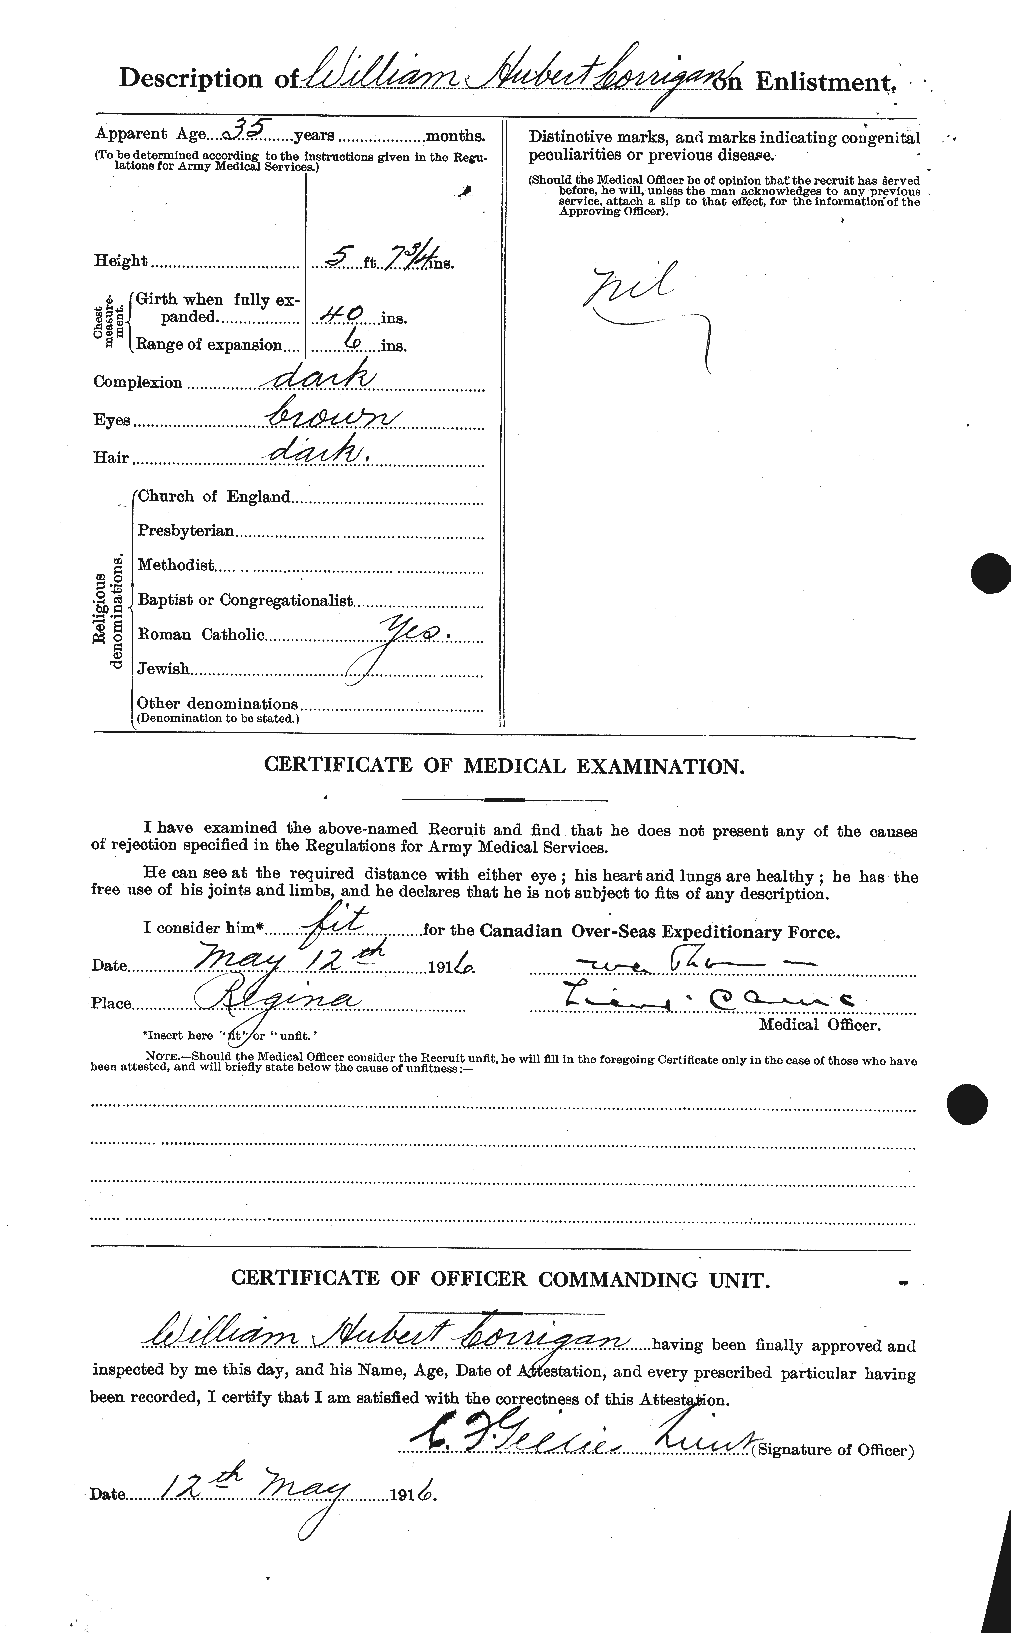 Personnel Records of the First World War - CEF 054673b